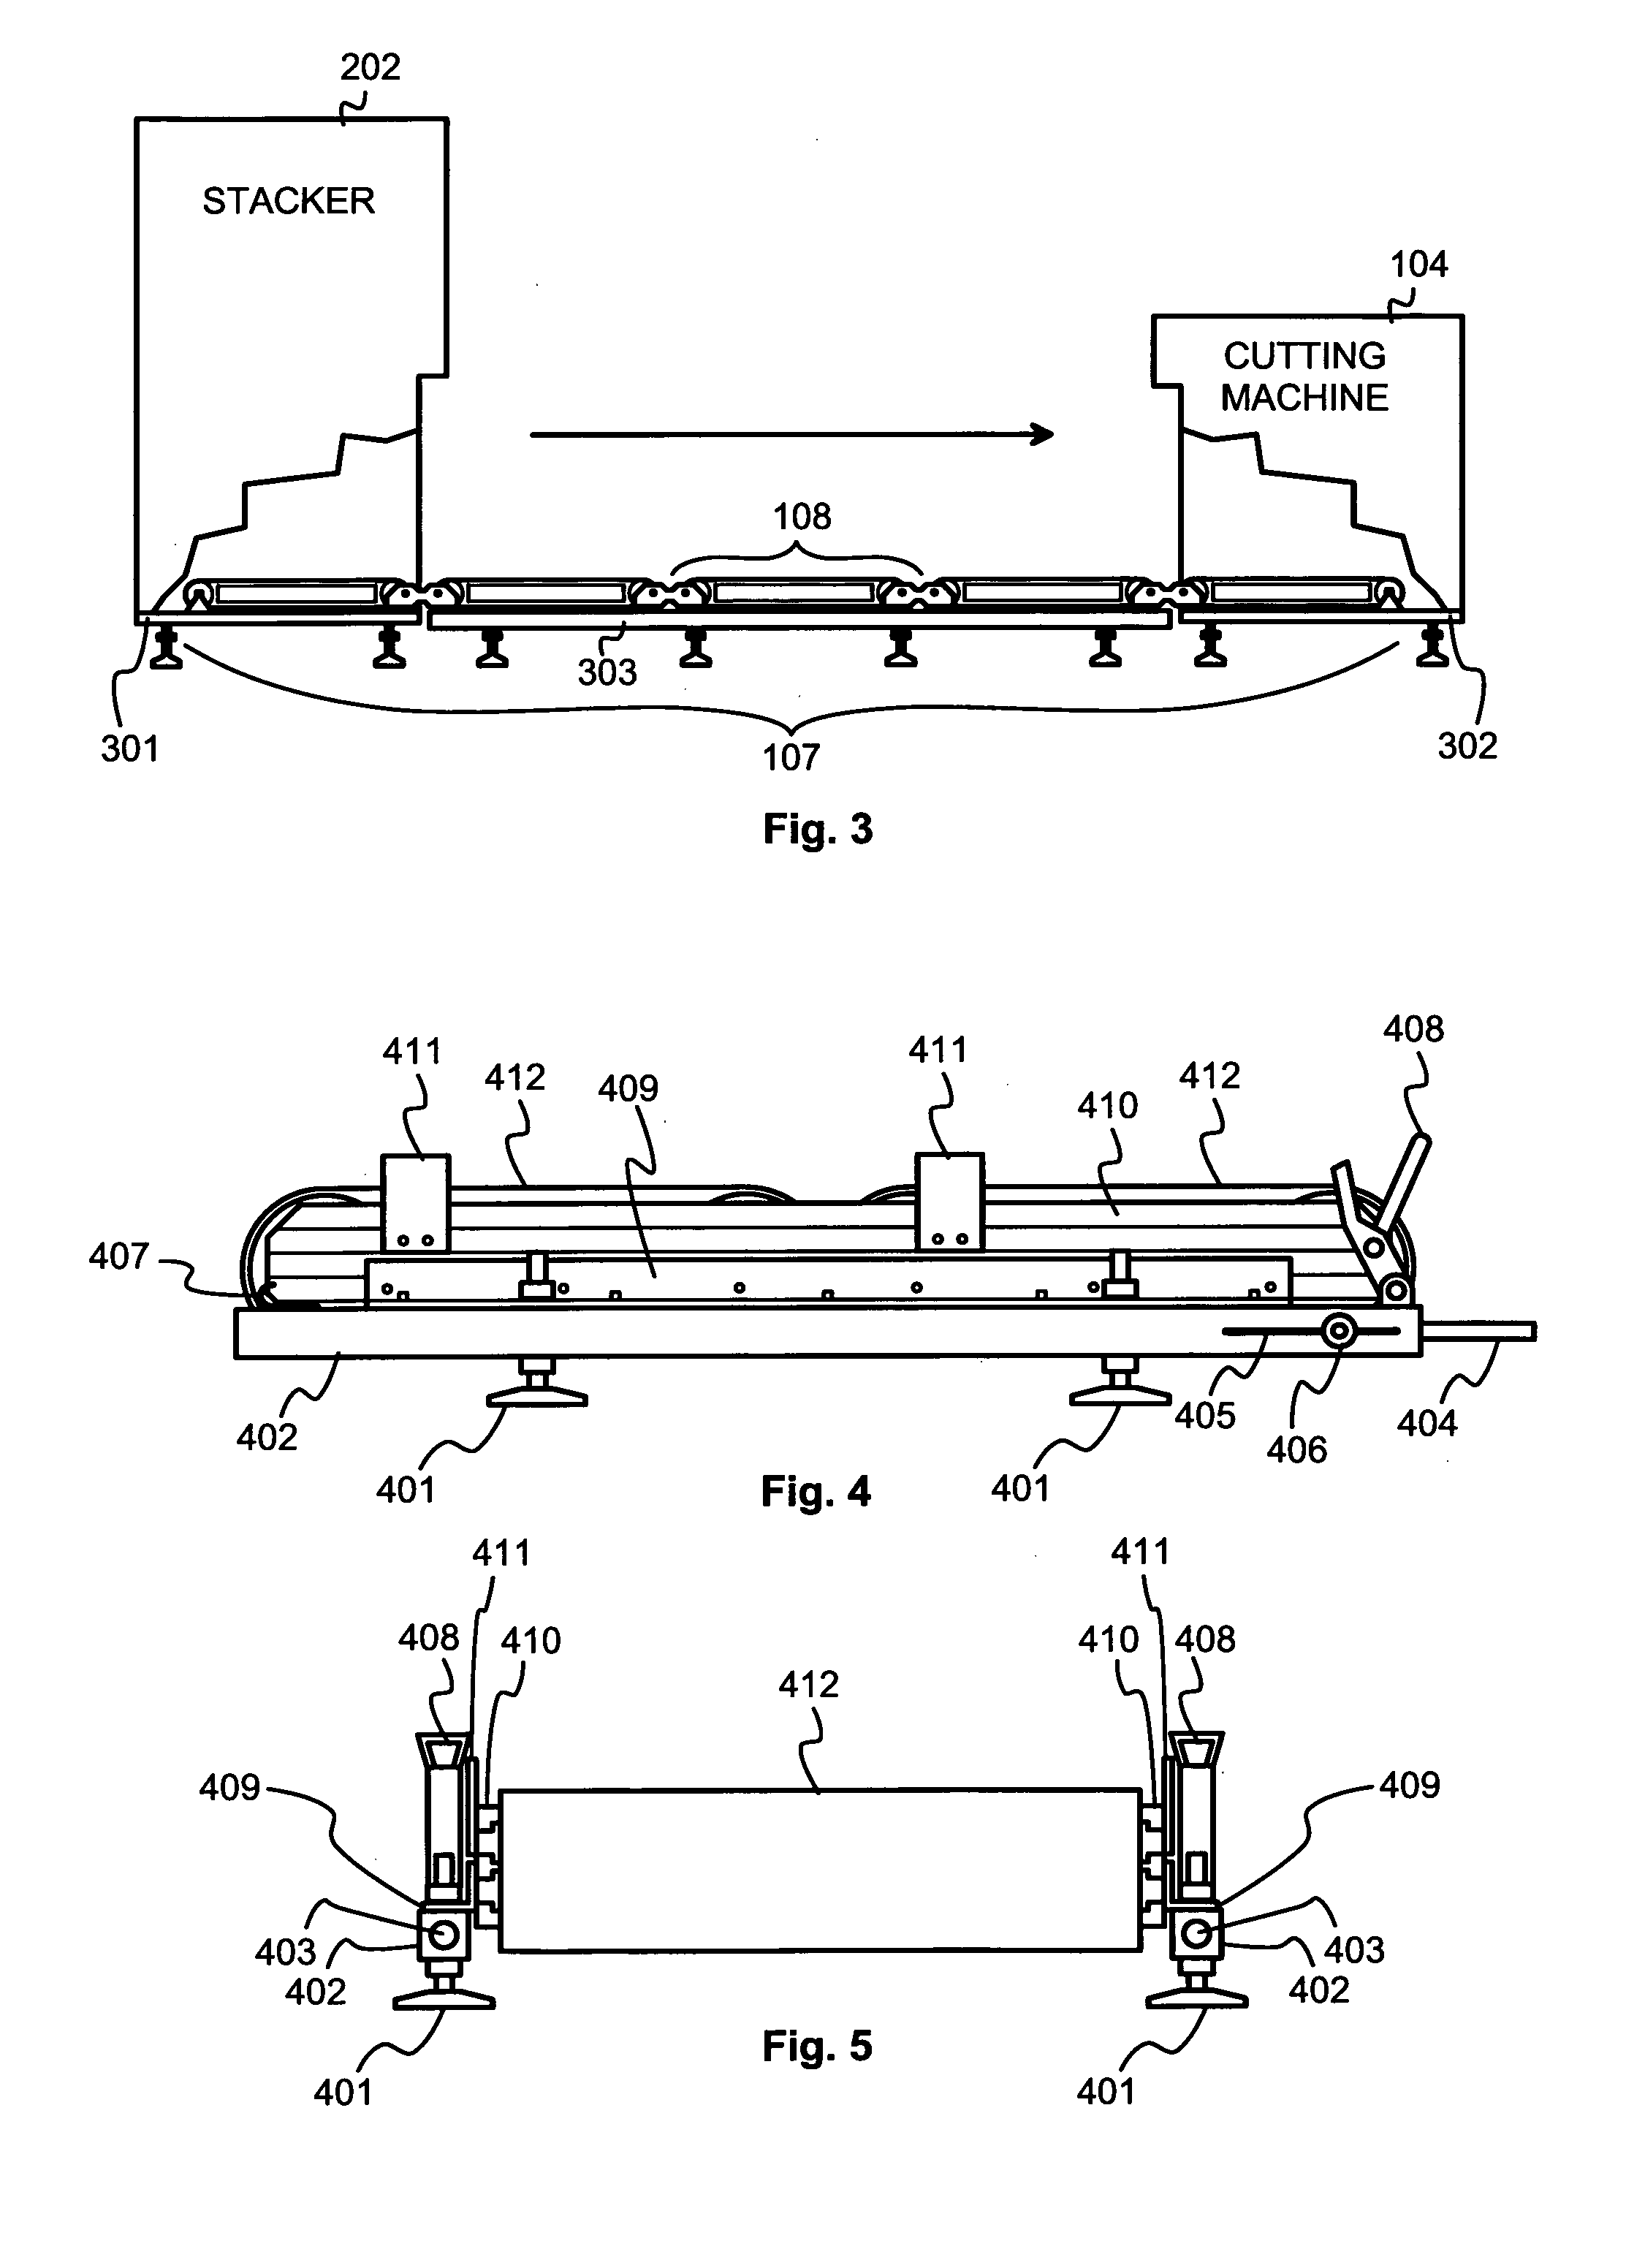 Method and arrangement for manufacturing packages in a digitally controlled process